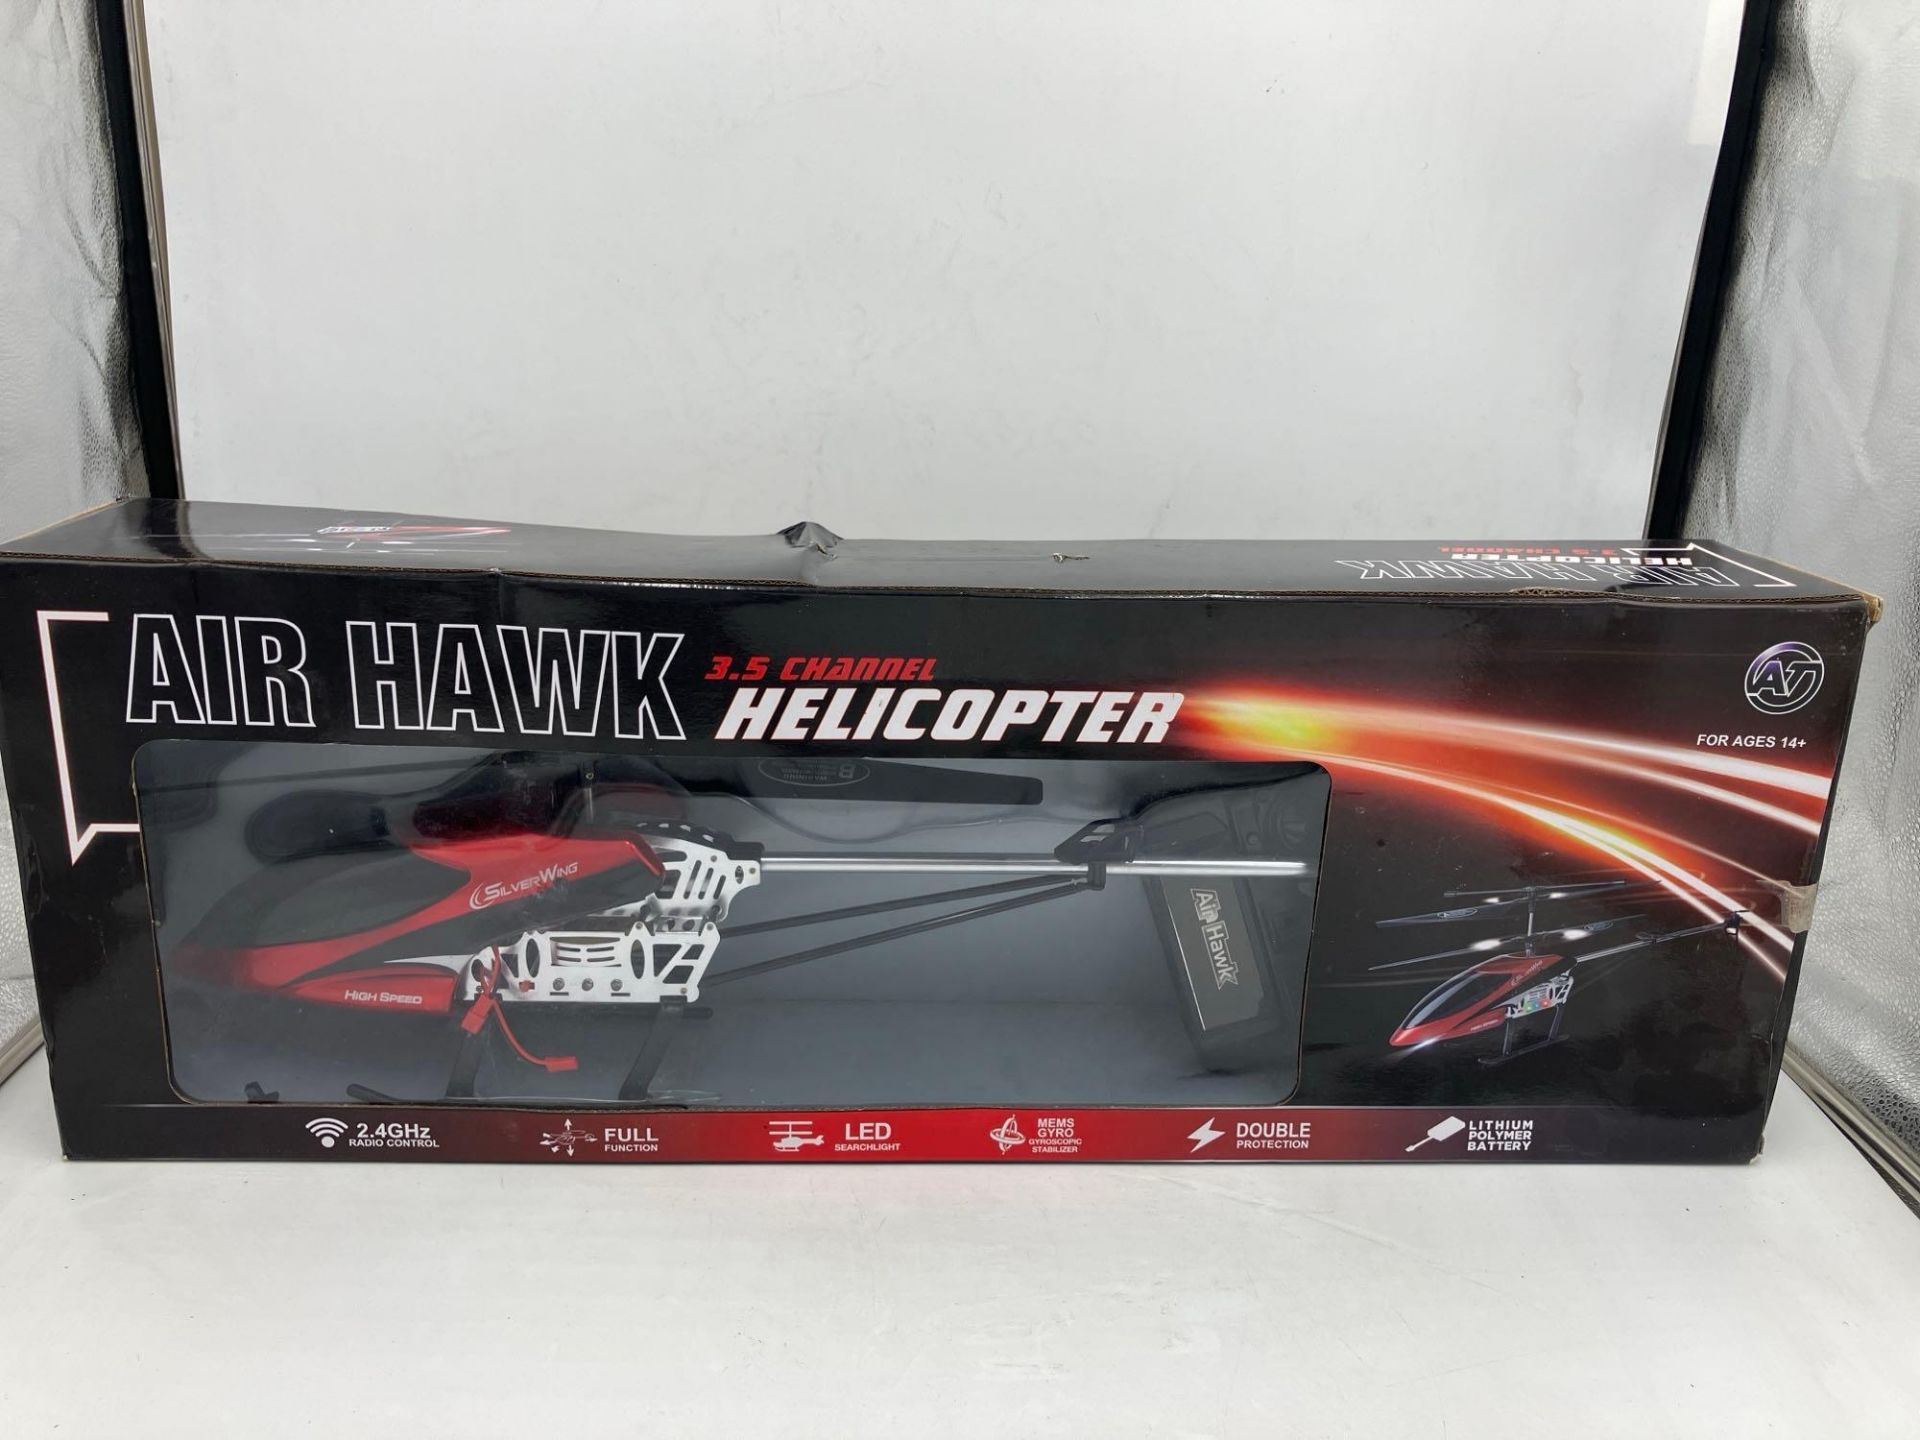 AIR HAWK HELICOPTER - REMOTE CONTROL - 9748